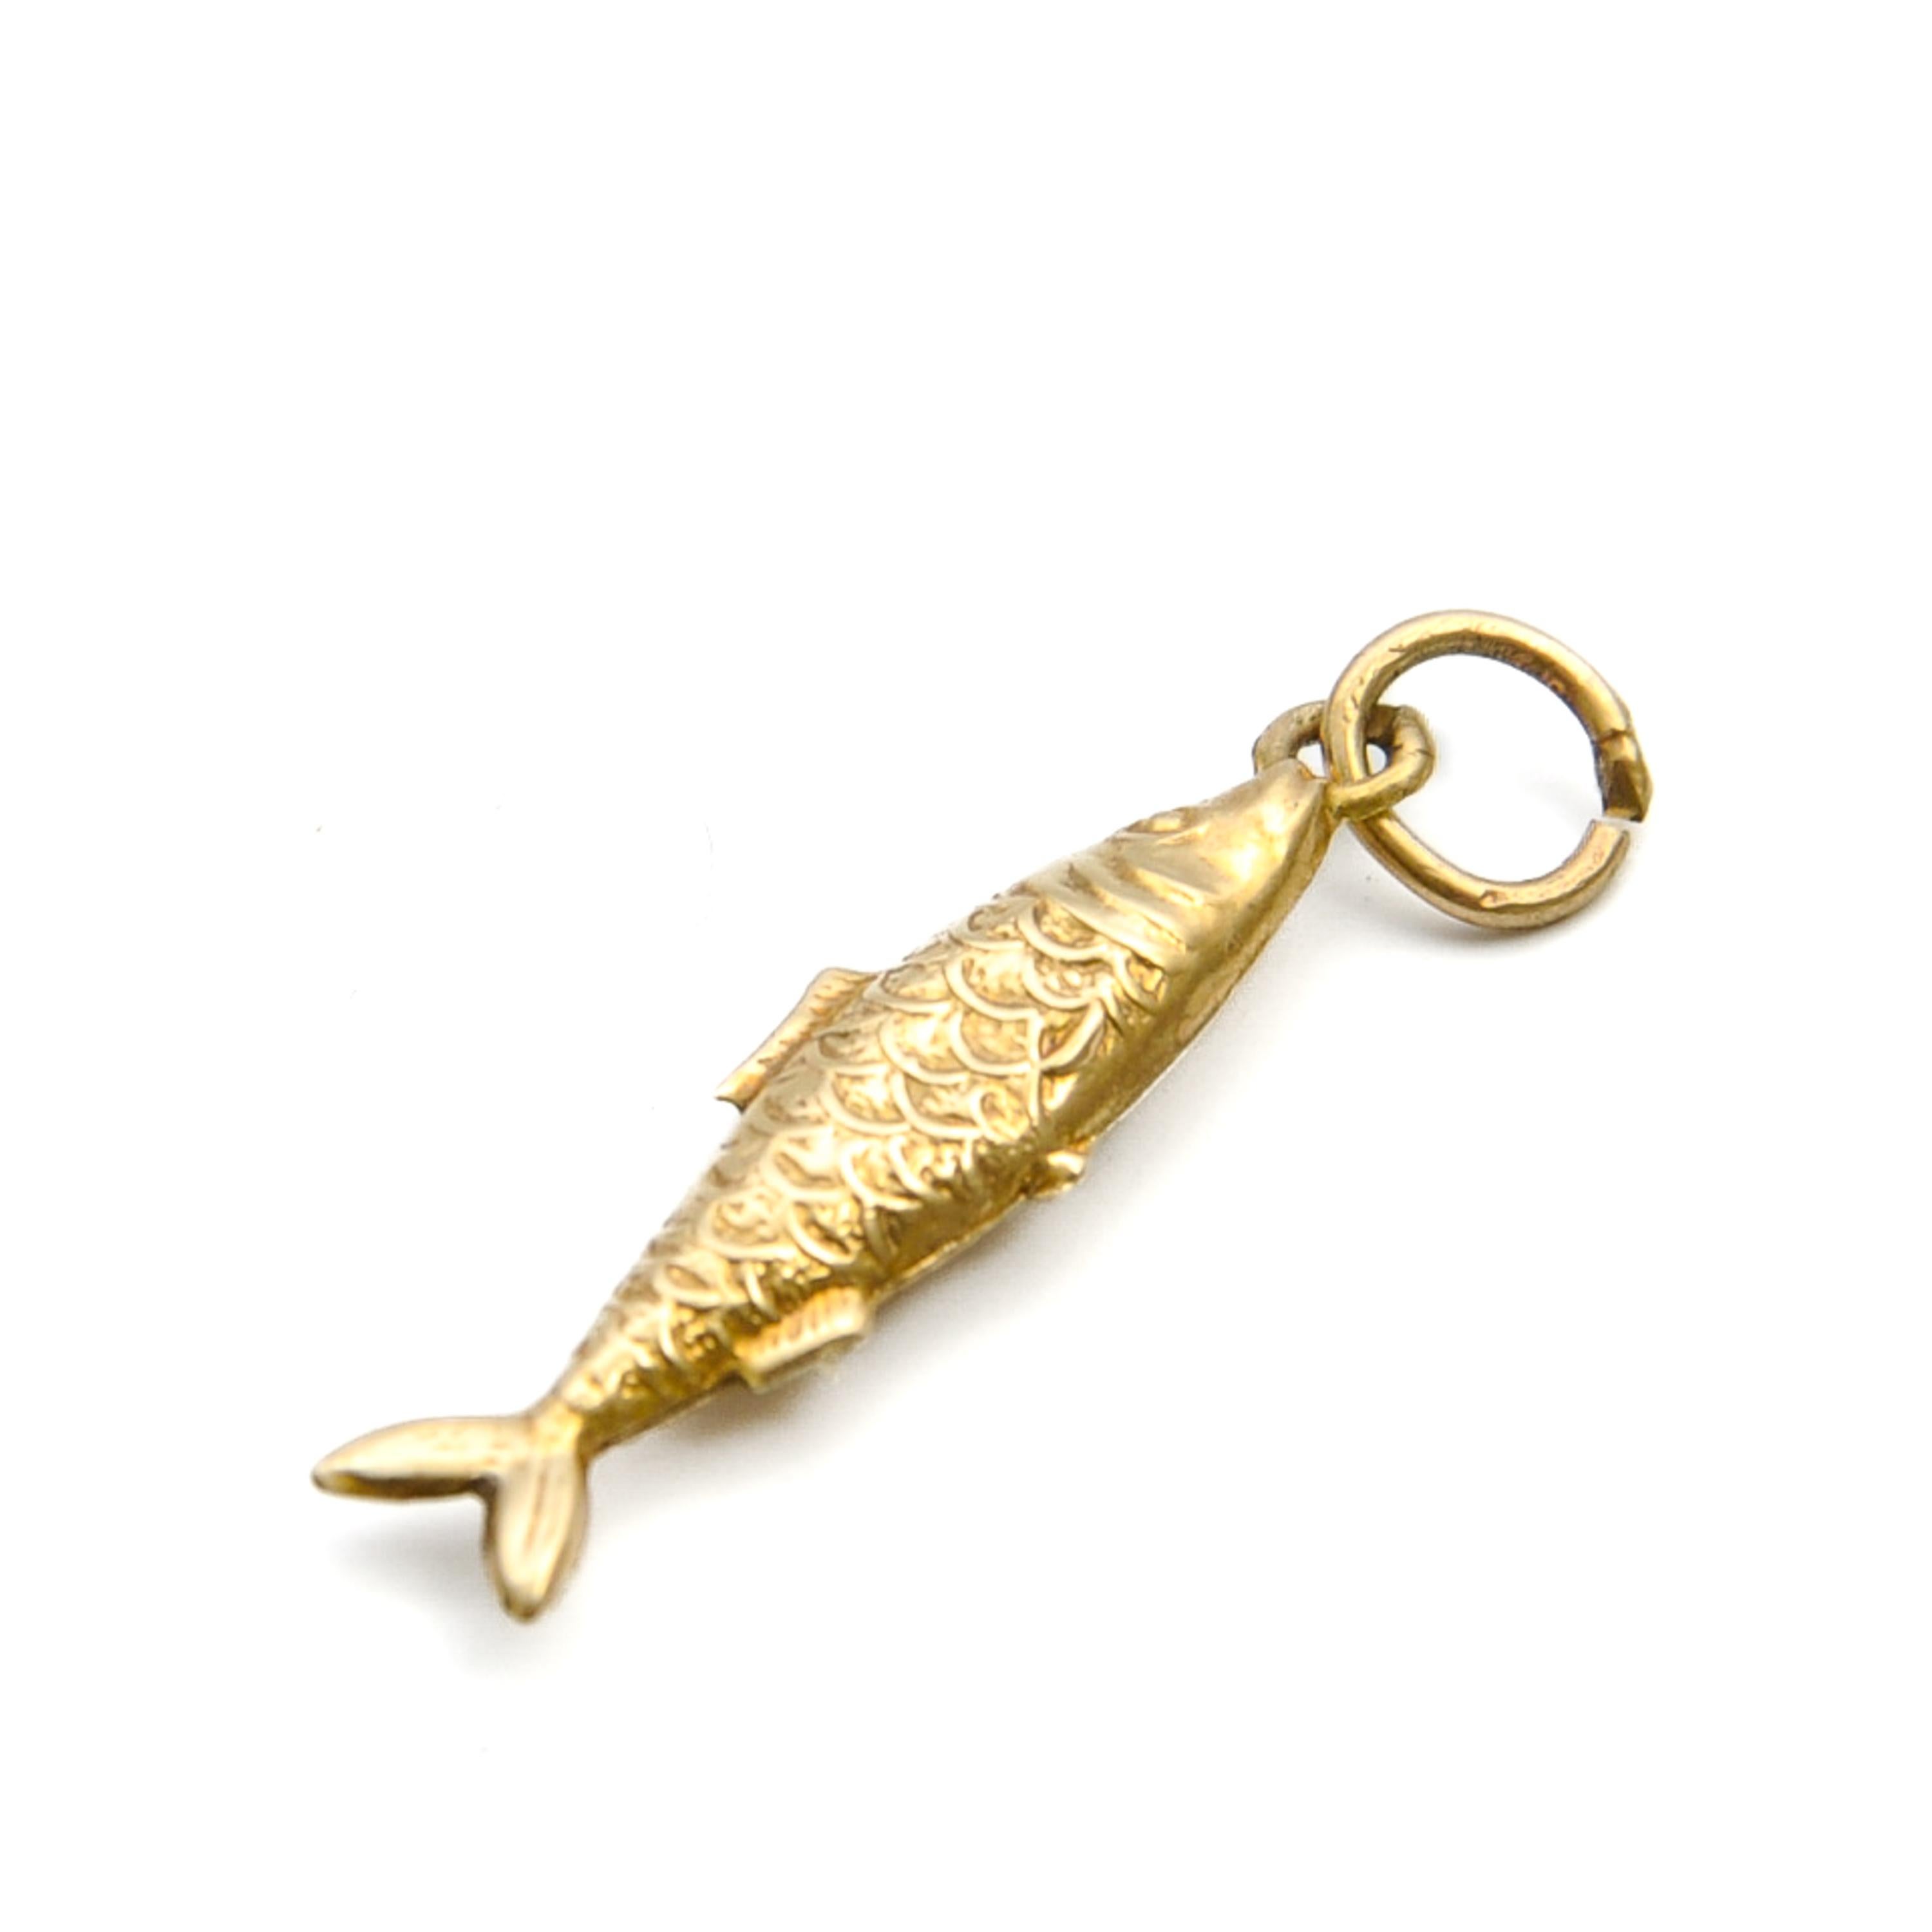 Vintage 9K Gold Zodiac Pisces Fish Charm Pendant In Good Condition For Sale In Rotterdam, NL